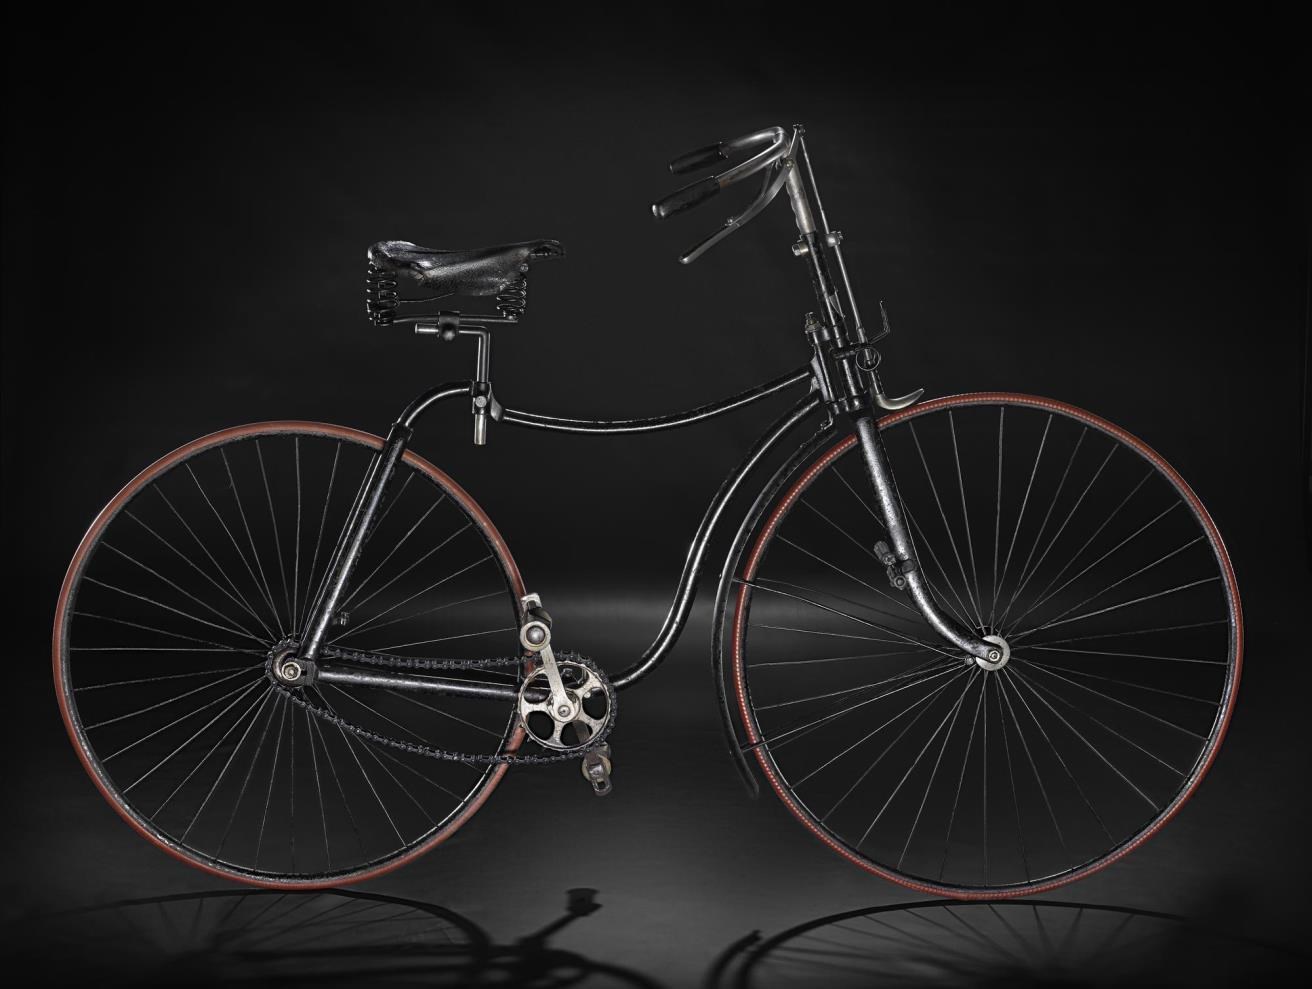 A vintage black bicycle with a light brown rim around the wheels, viewed from the side and standing upright against a black background.